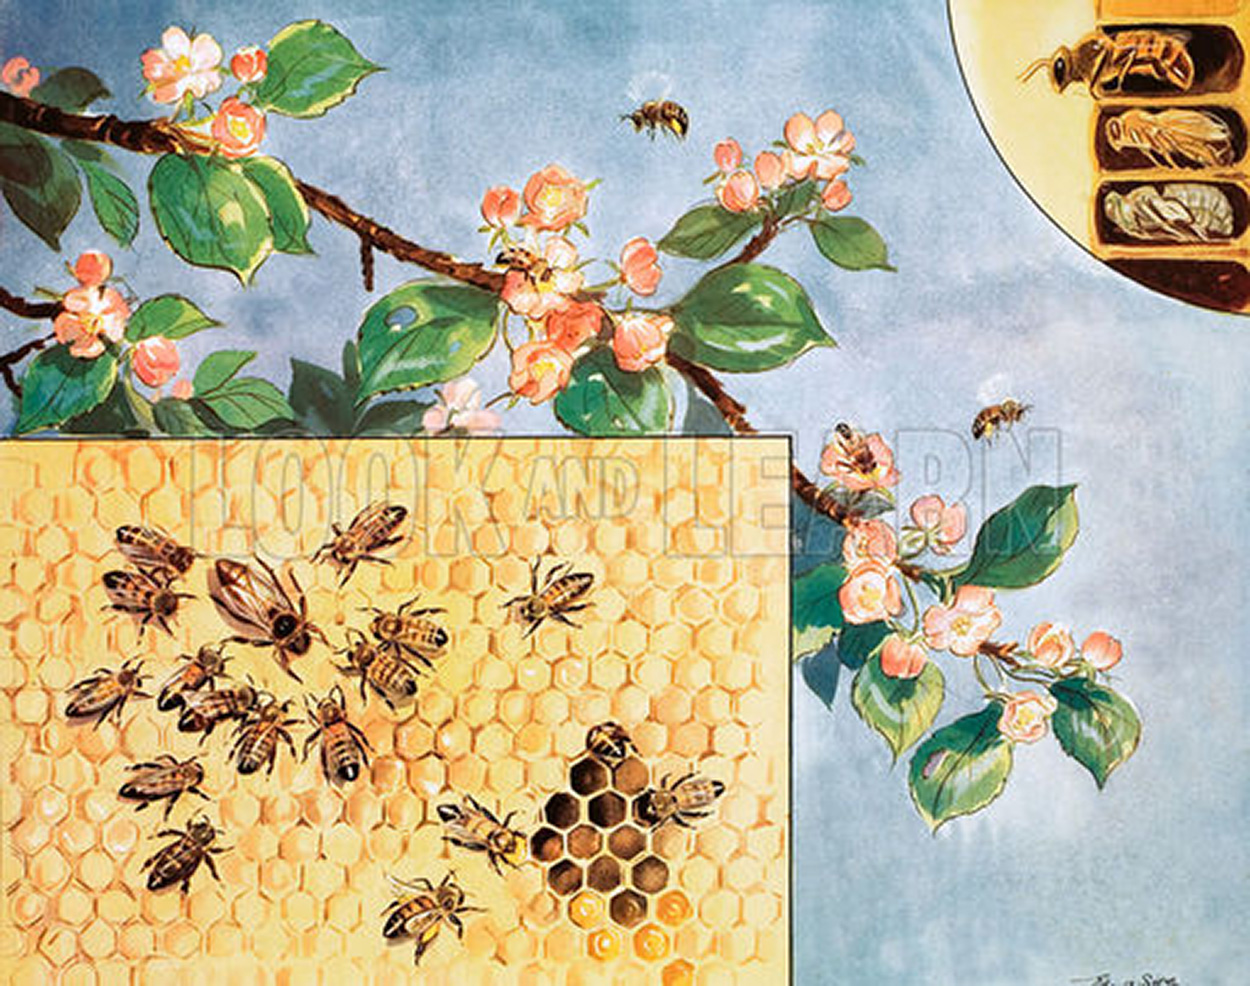 Peggy visits the bees (Original Macmillan Poster) (Print) art by Eileen Soper at The Illustration Art Gallery